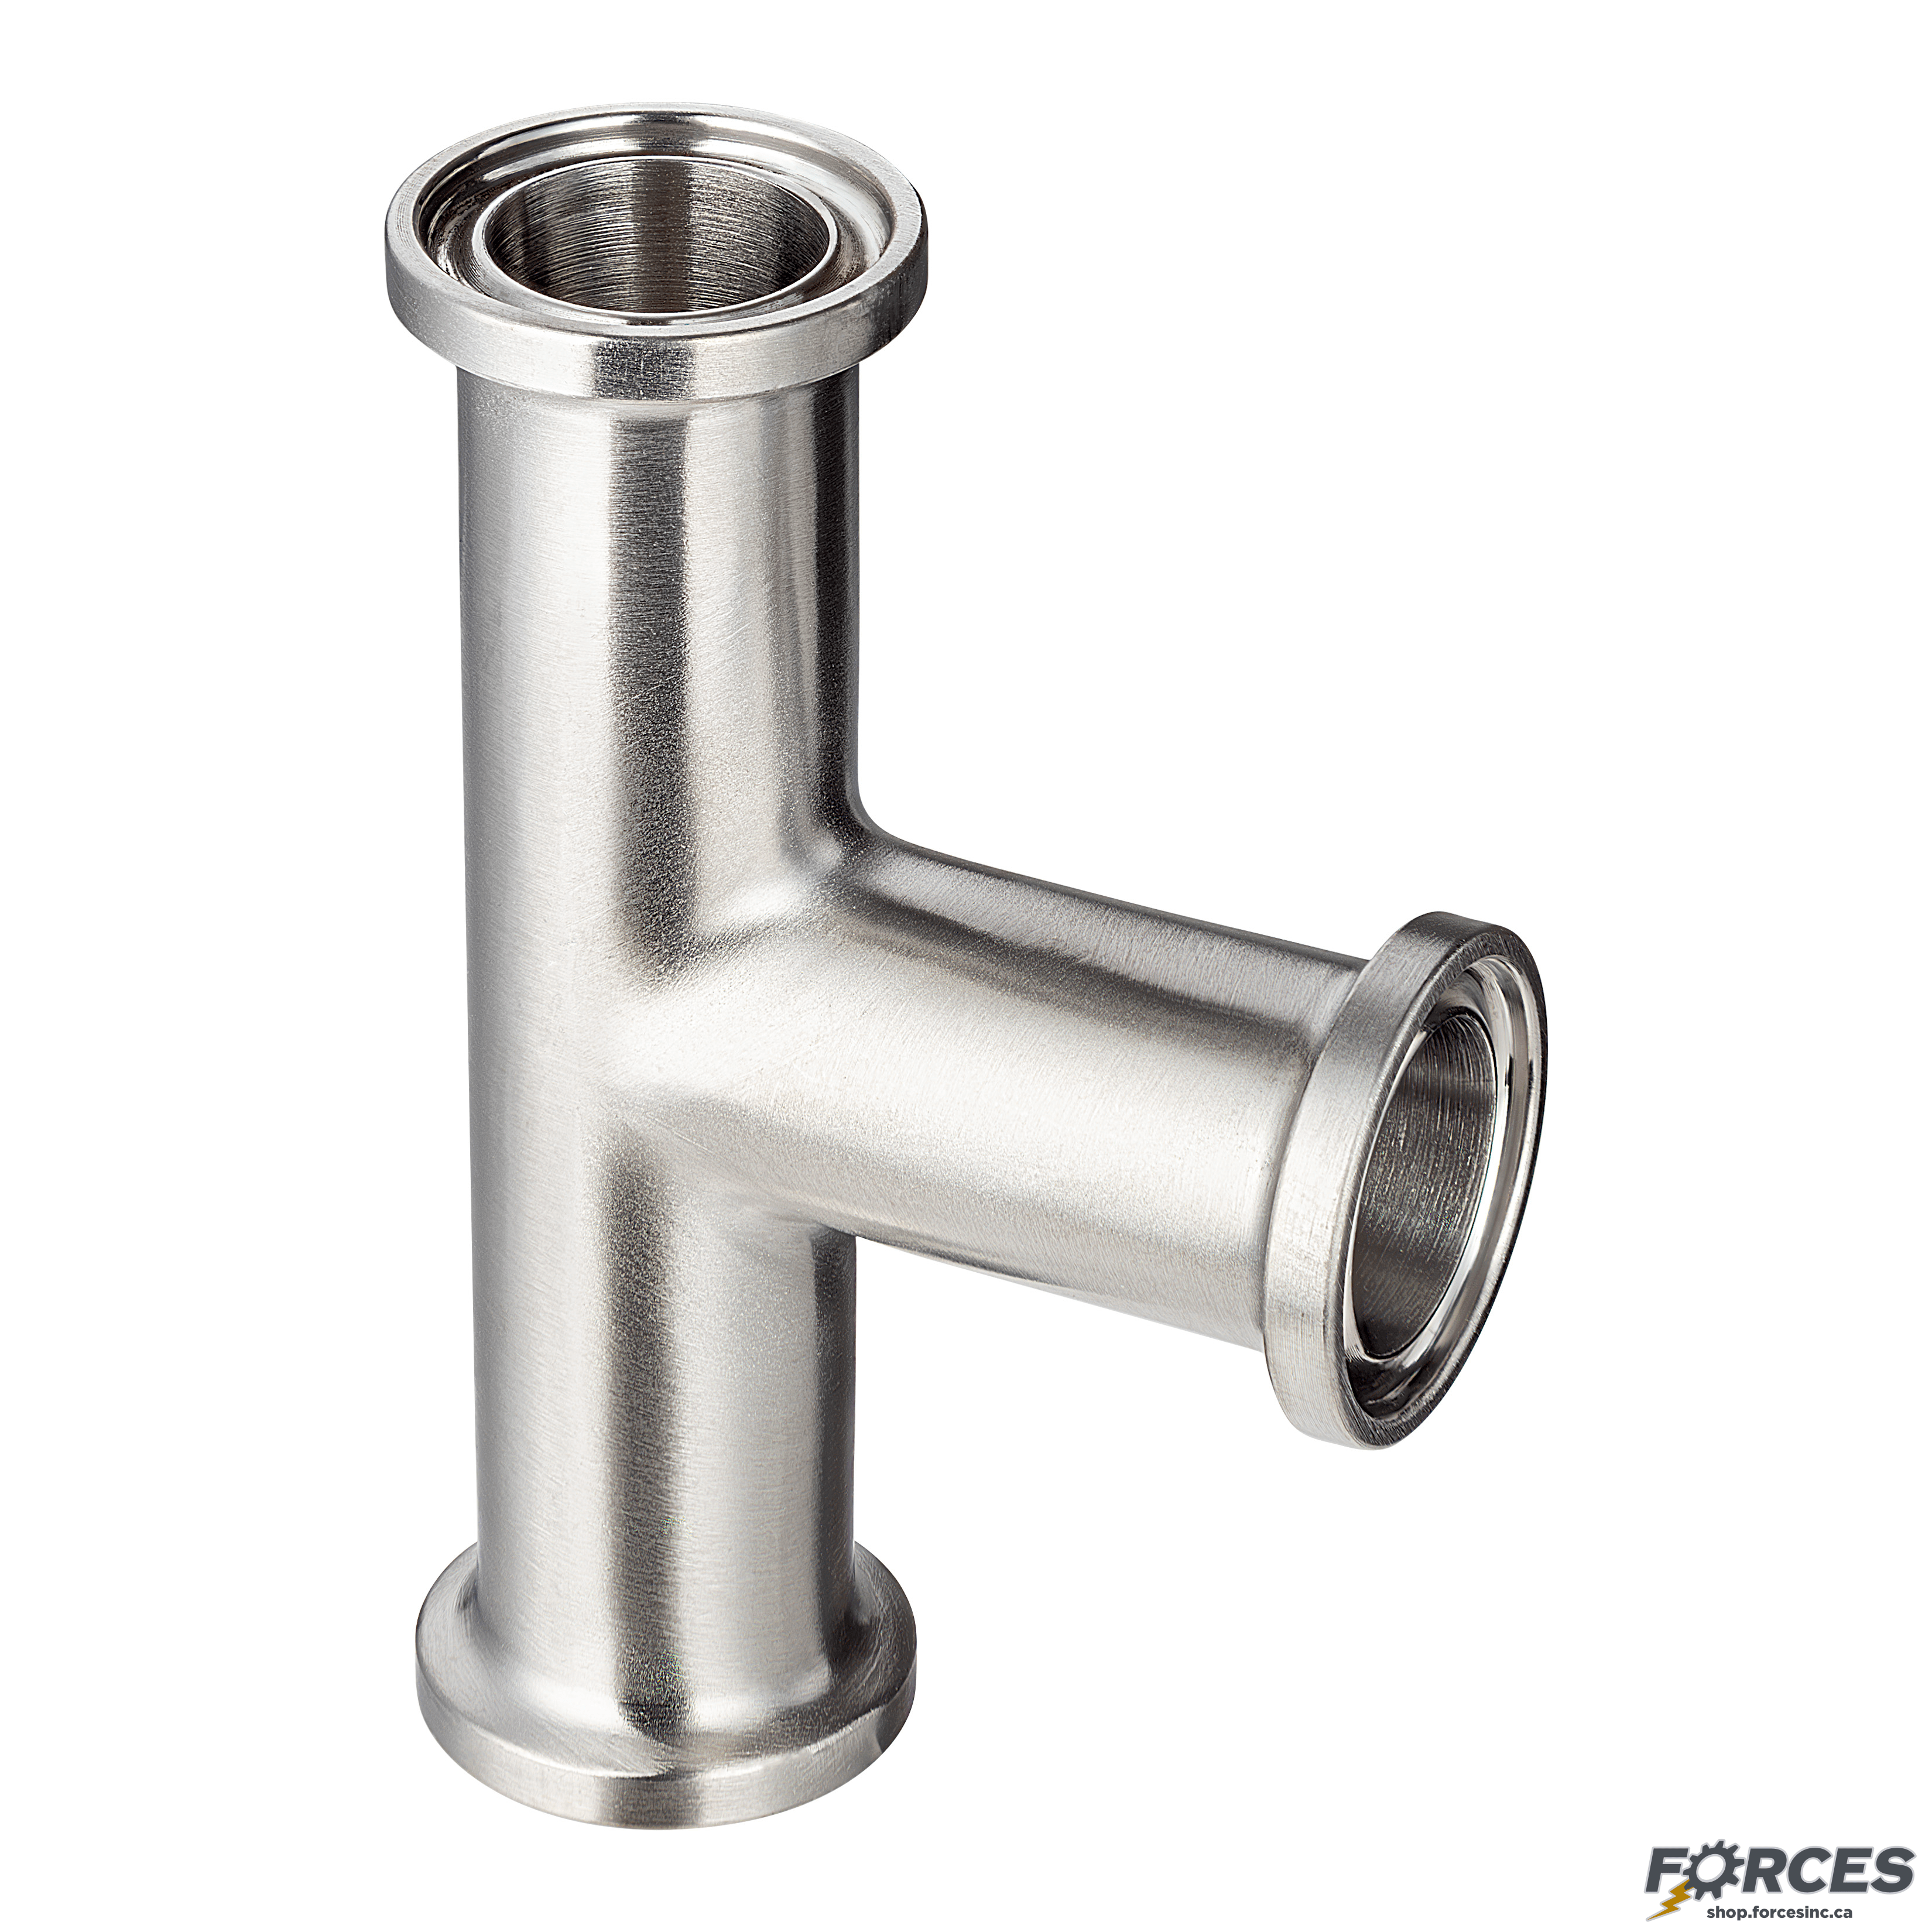 1" Tri-Clamp Short Tee - Stainless Steel 316 - Forces Inc